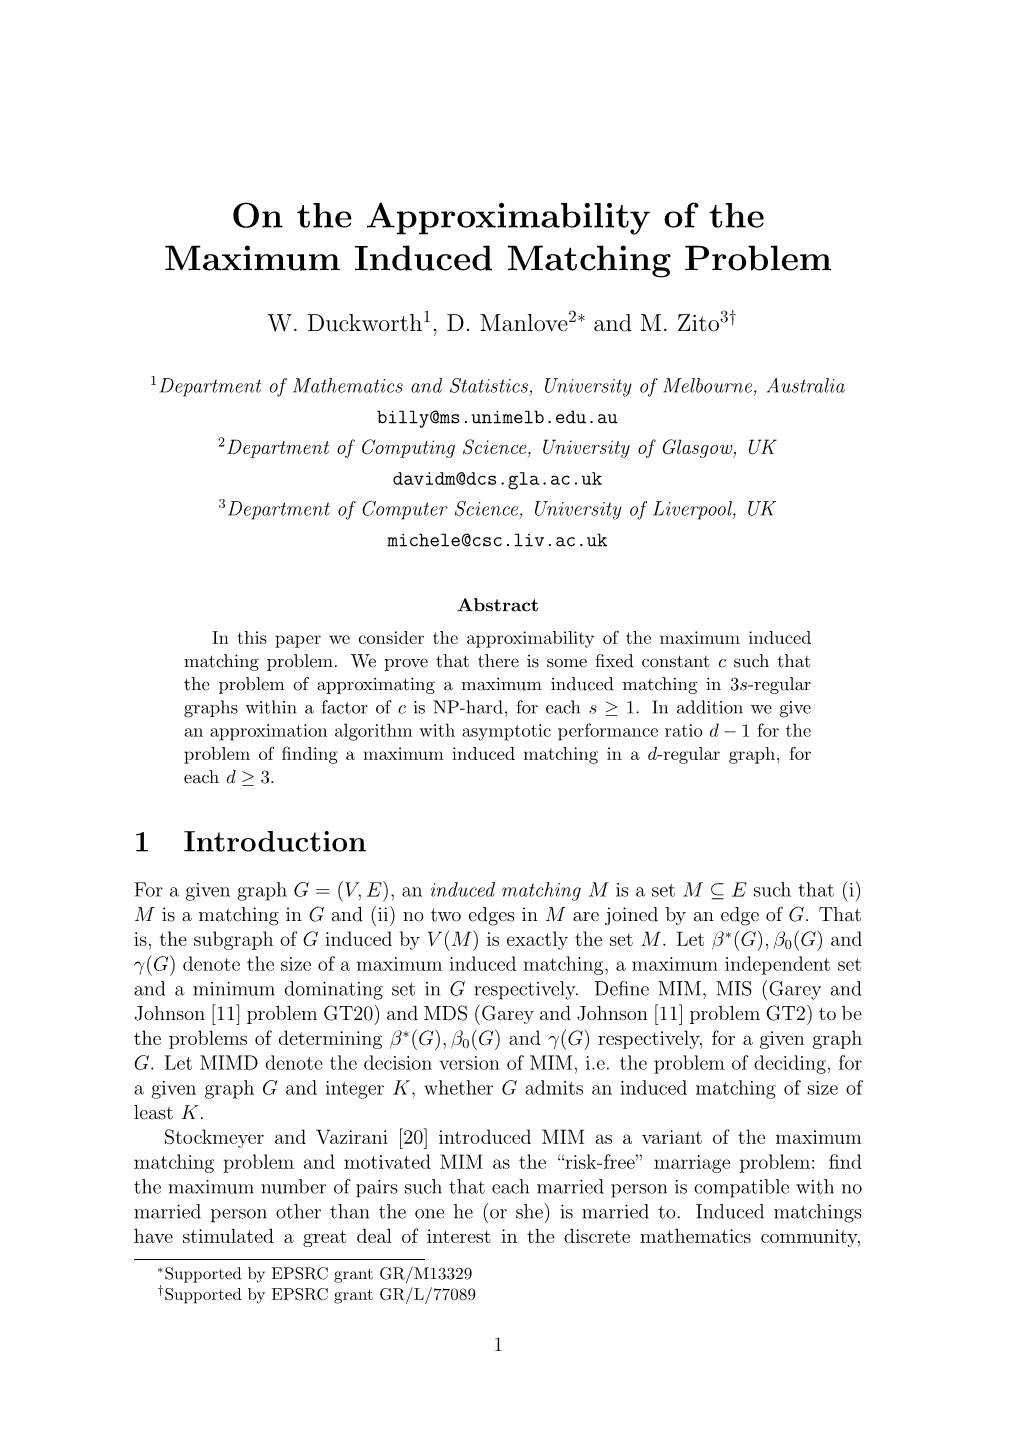 On the Approximability of the Maximum Induced Matching Problem